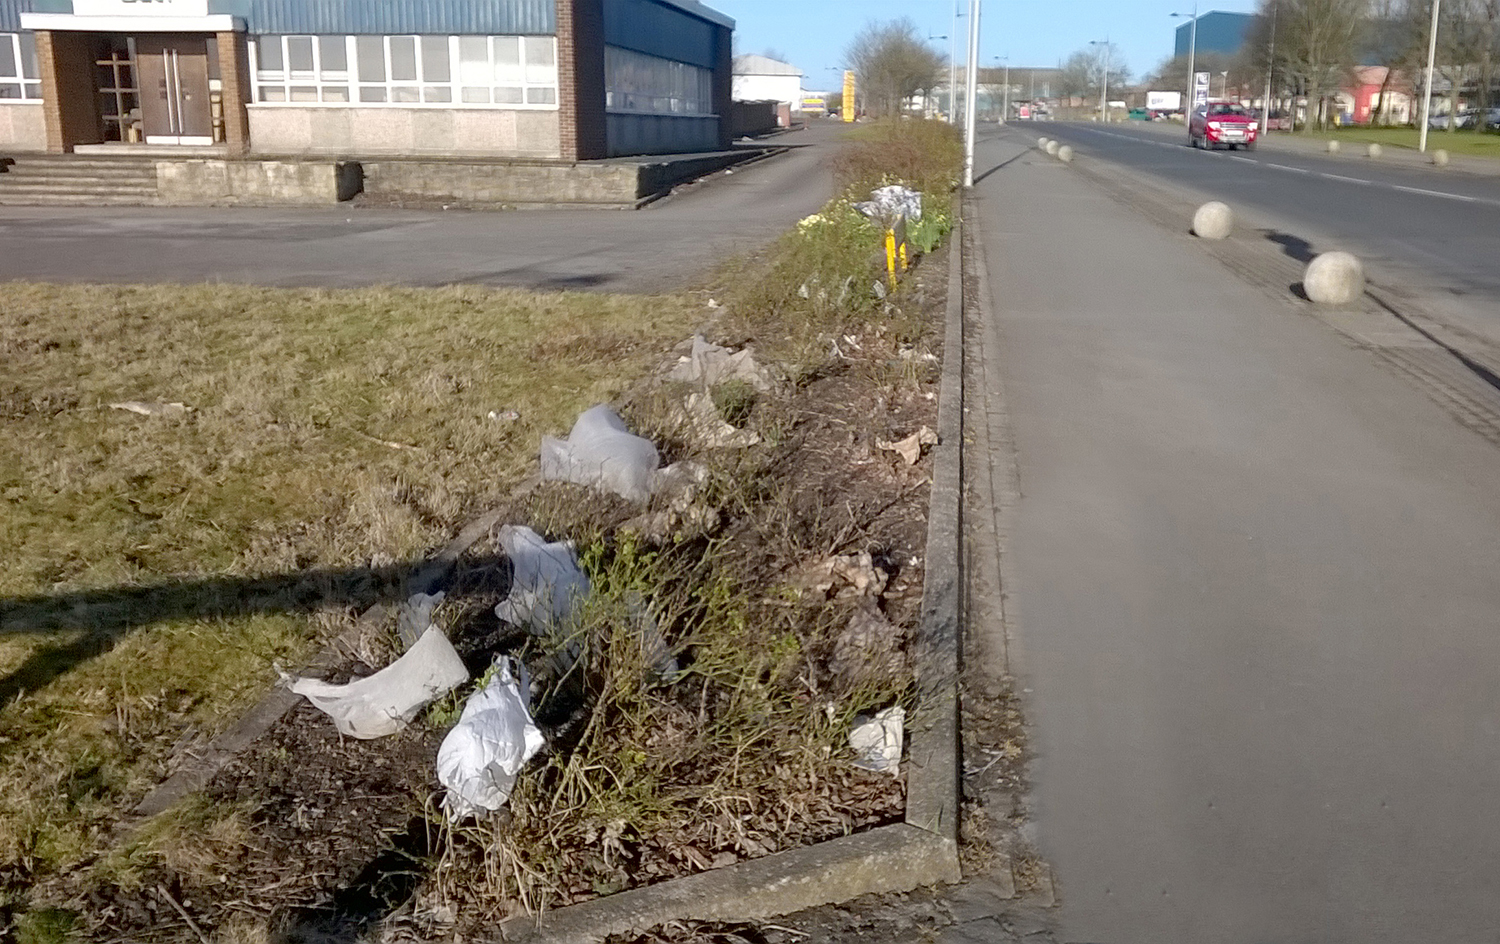 Litter at Entrance to Town